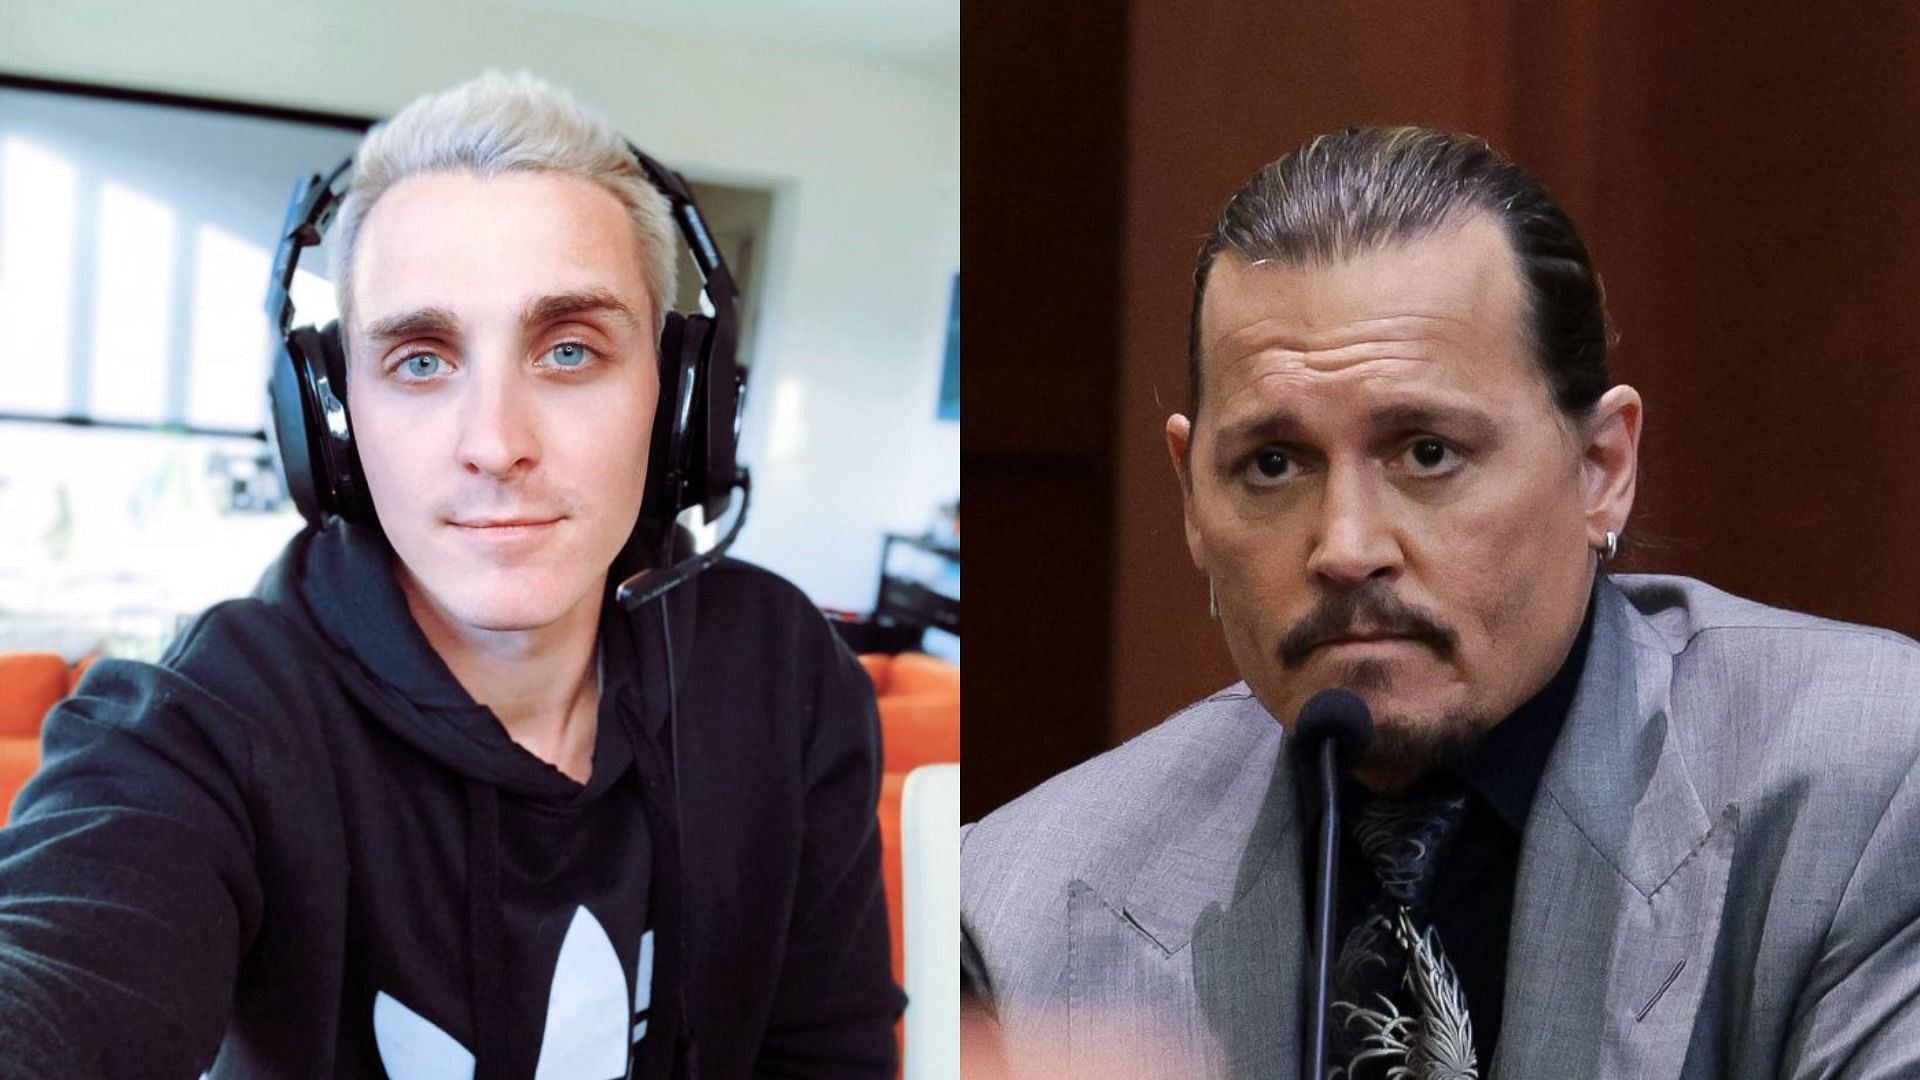 Johnny Depp&#039;s team had planned to call TMZ&#039;s ex-producer Morgan Tremaine to testify in court. (Image via Twitter/@ASTROGaming, Getty Images/Evelyn Hockstein)